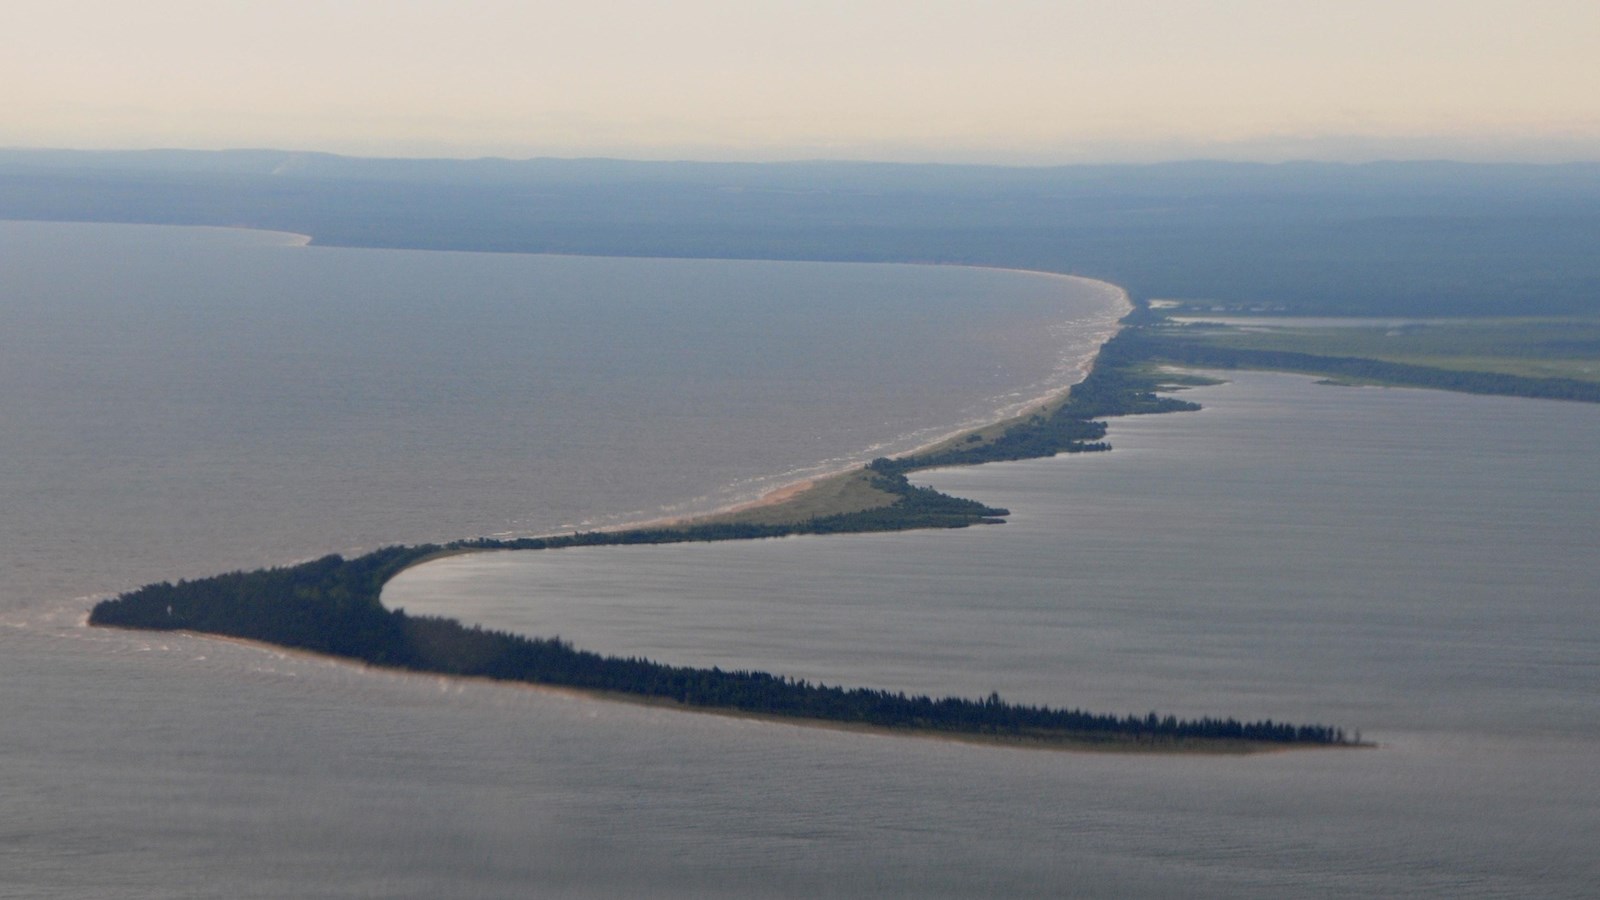 Aerial view of a peninsula surrounded by water and the distant mainland.